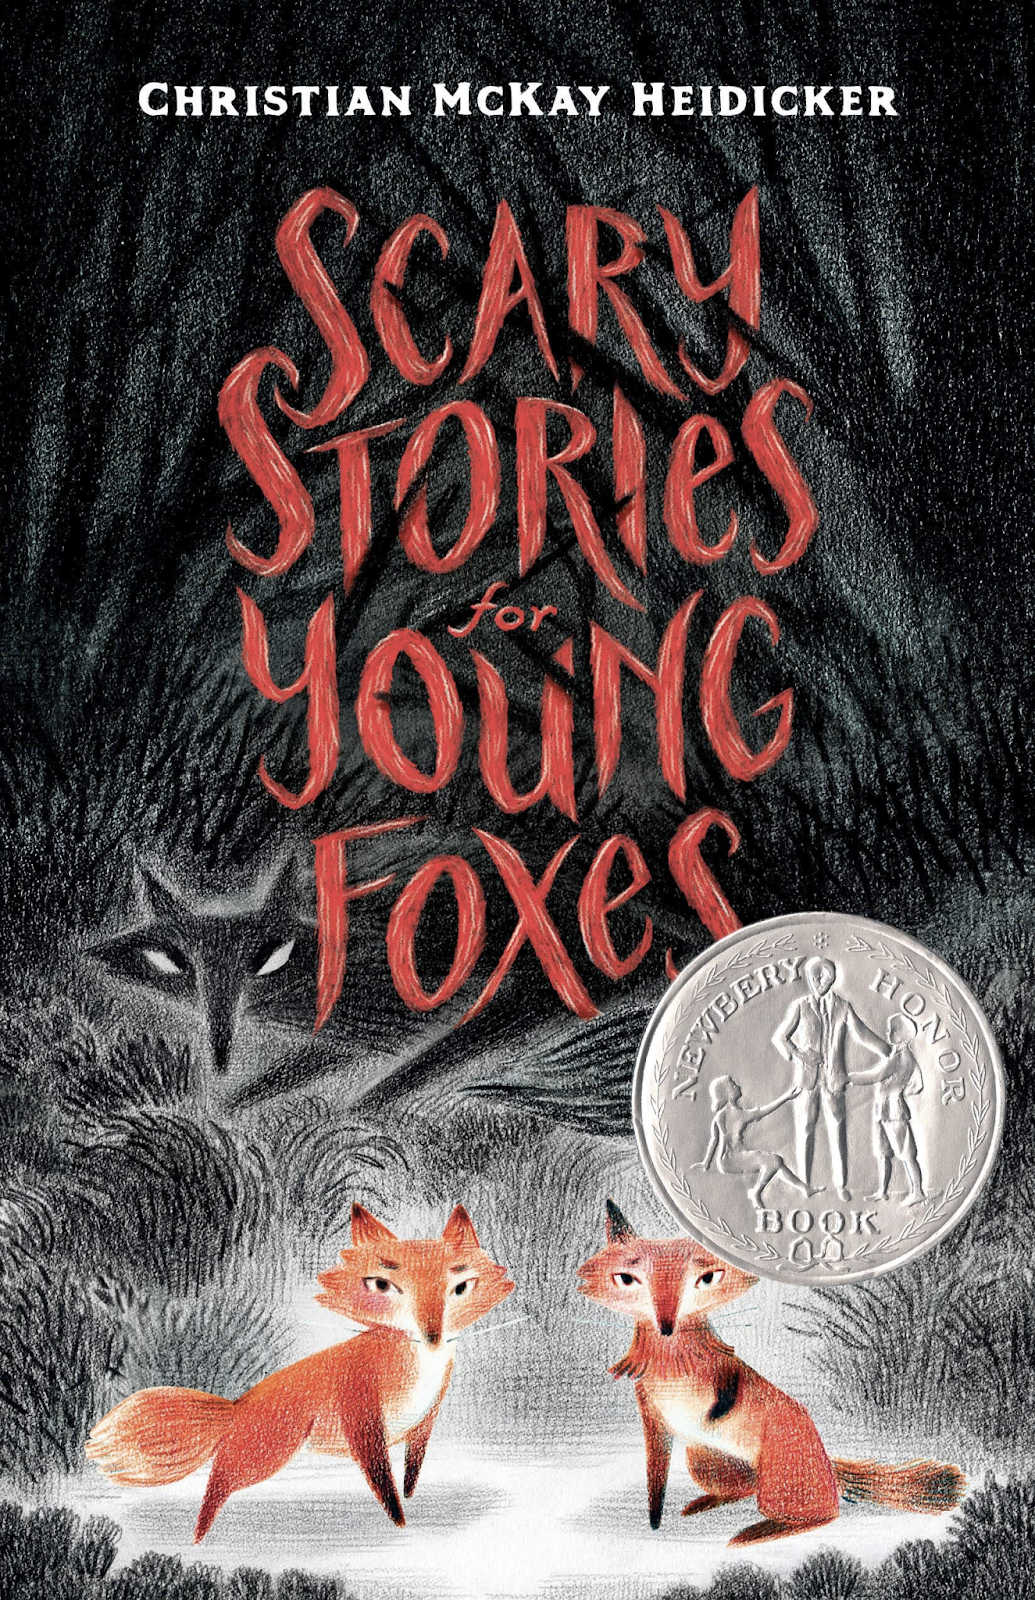 book cover of Scary Stories and Young Foxes by Christian McKay Heidicker